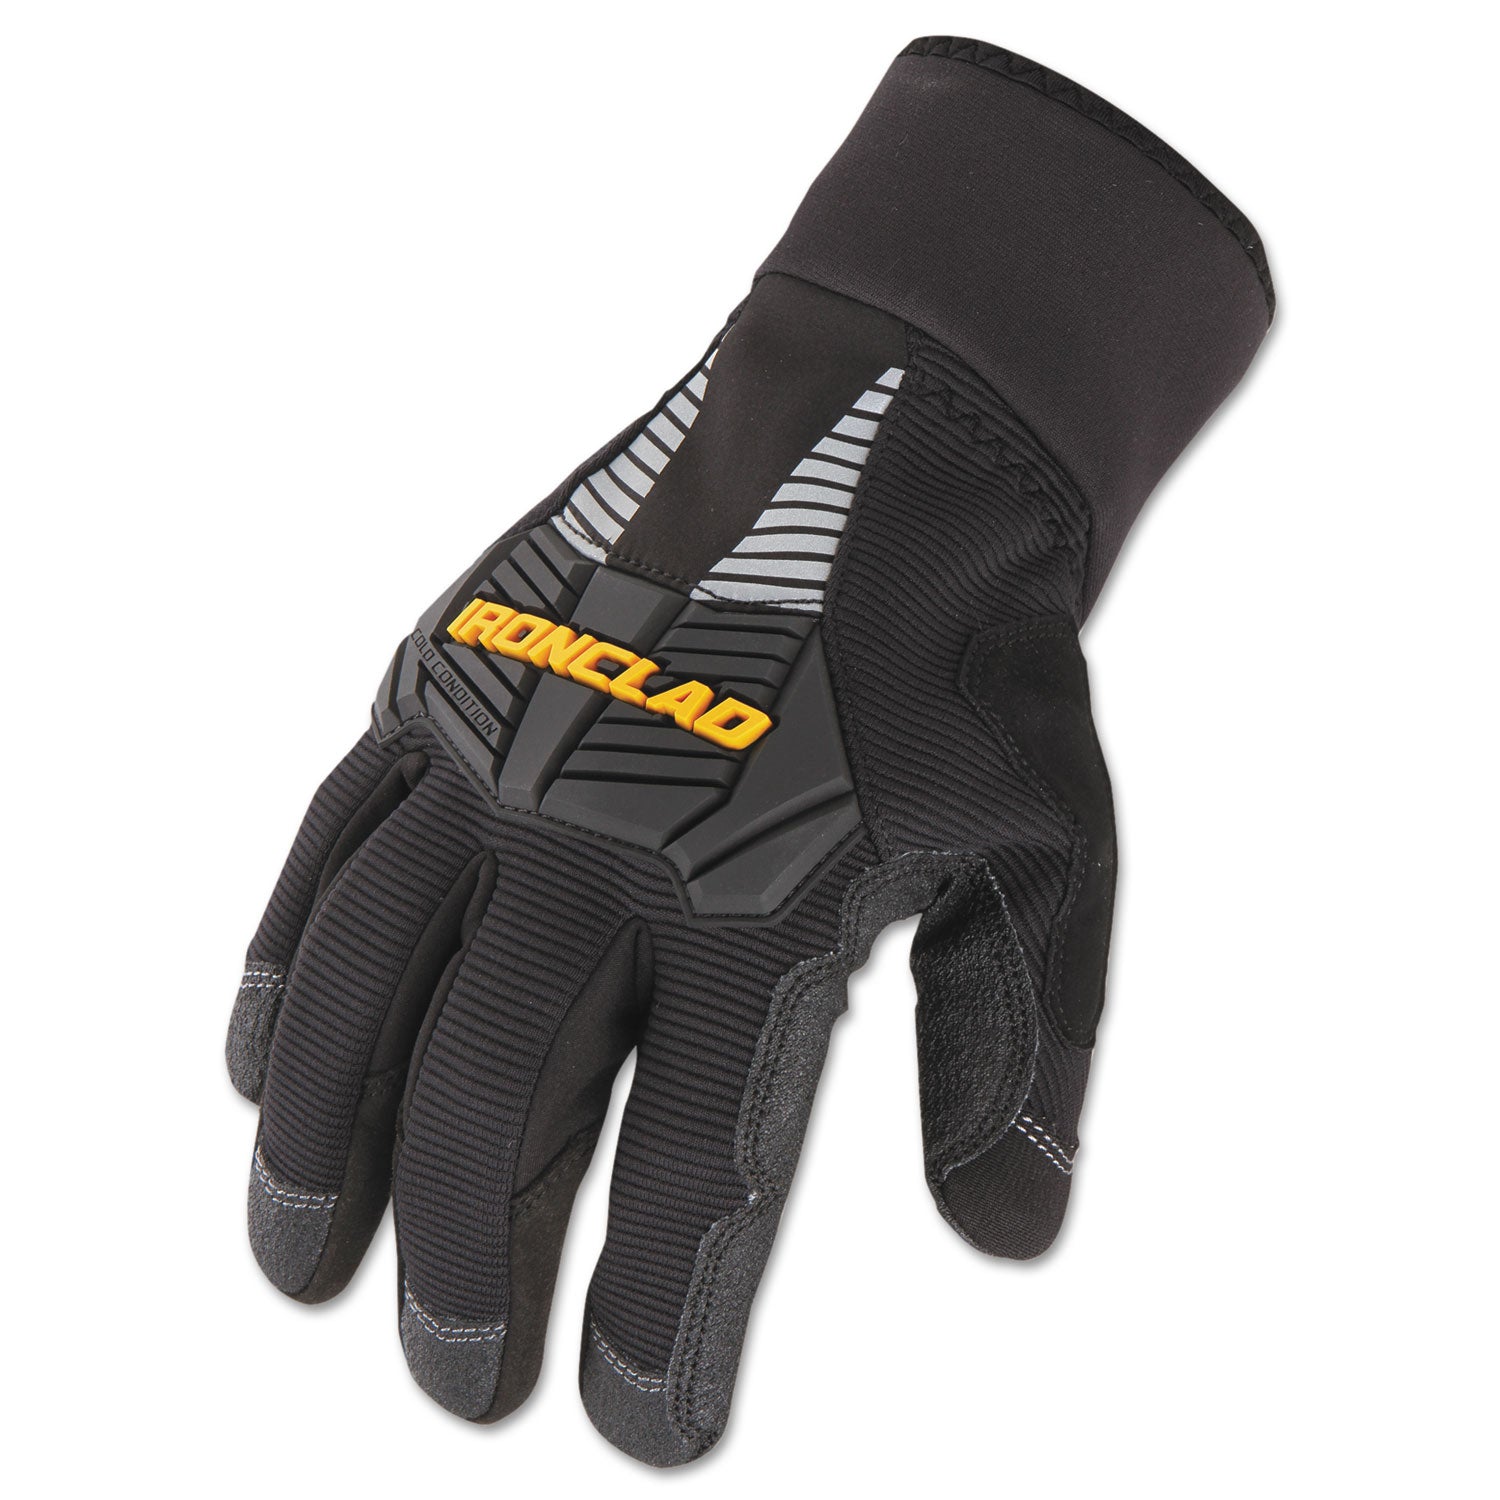 Cold Condition Gloves, Black, X-Large - 